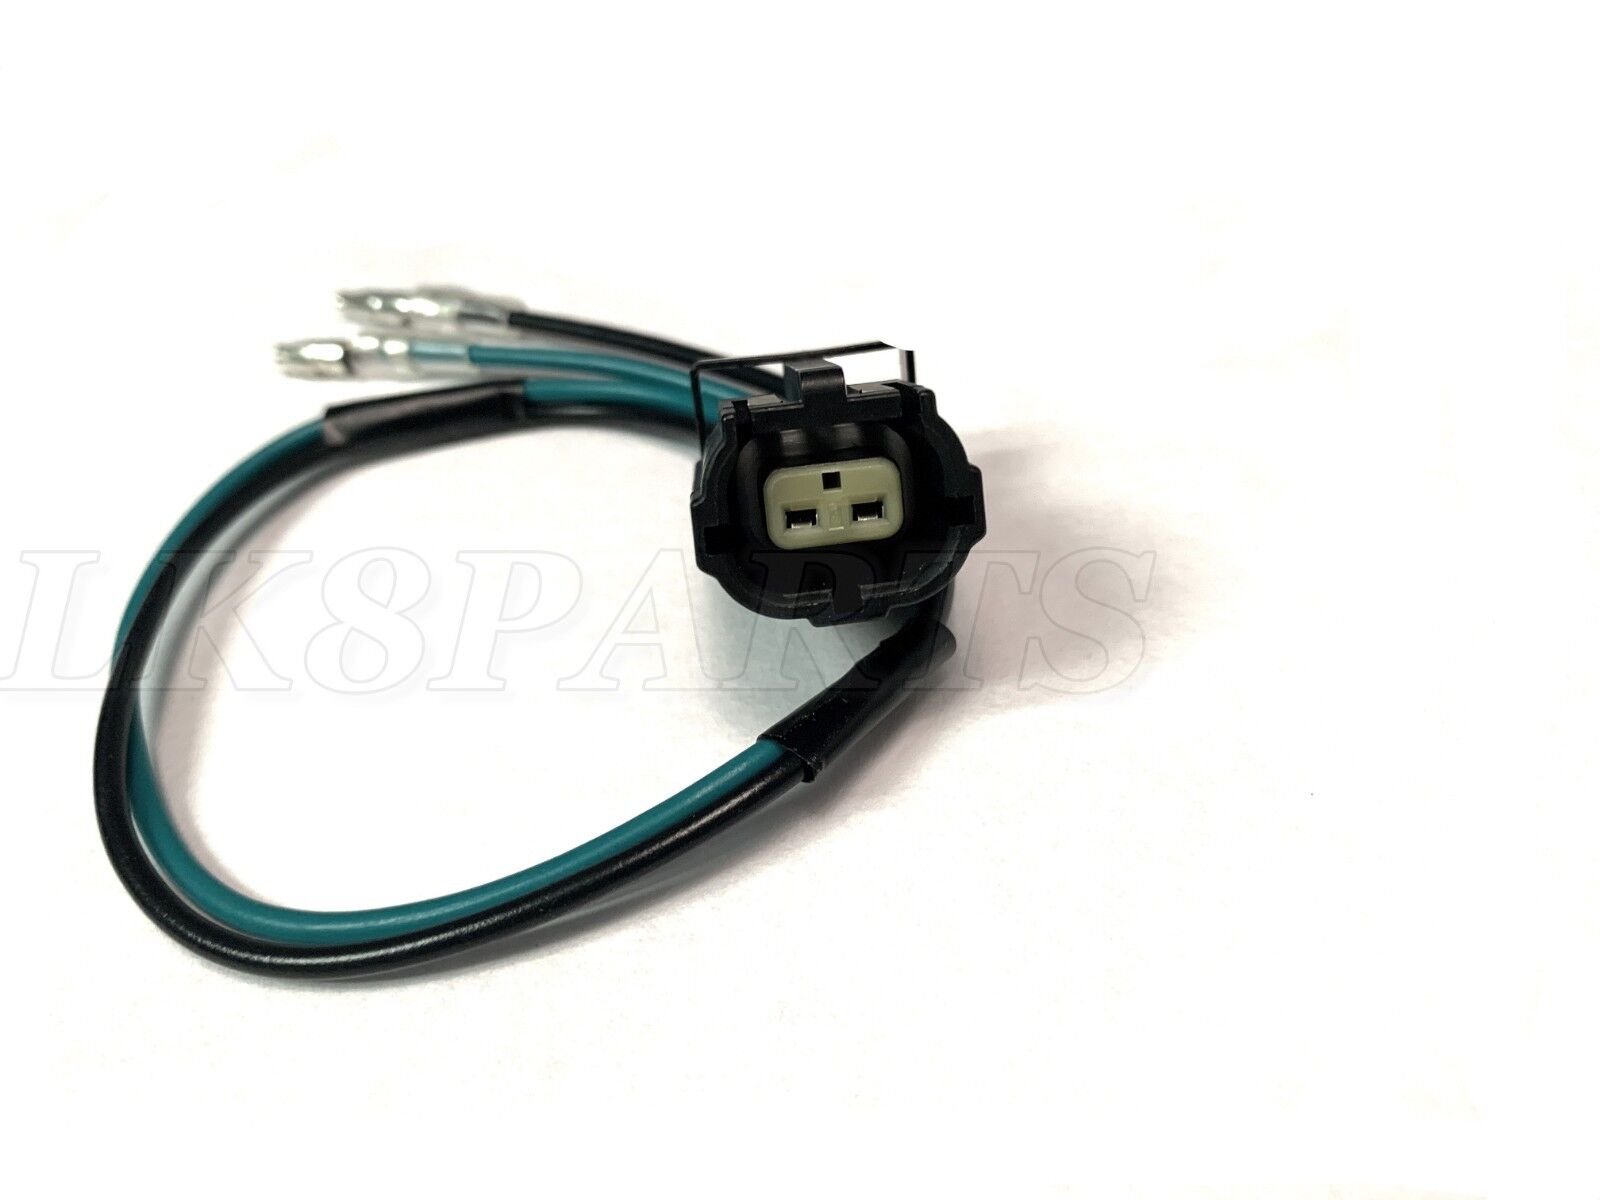 Land Rover Defender 90 110 130 Indicator Lamp Harness Extension STC1188 New